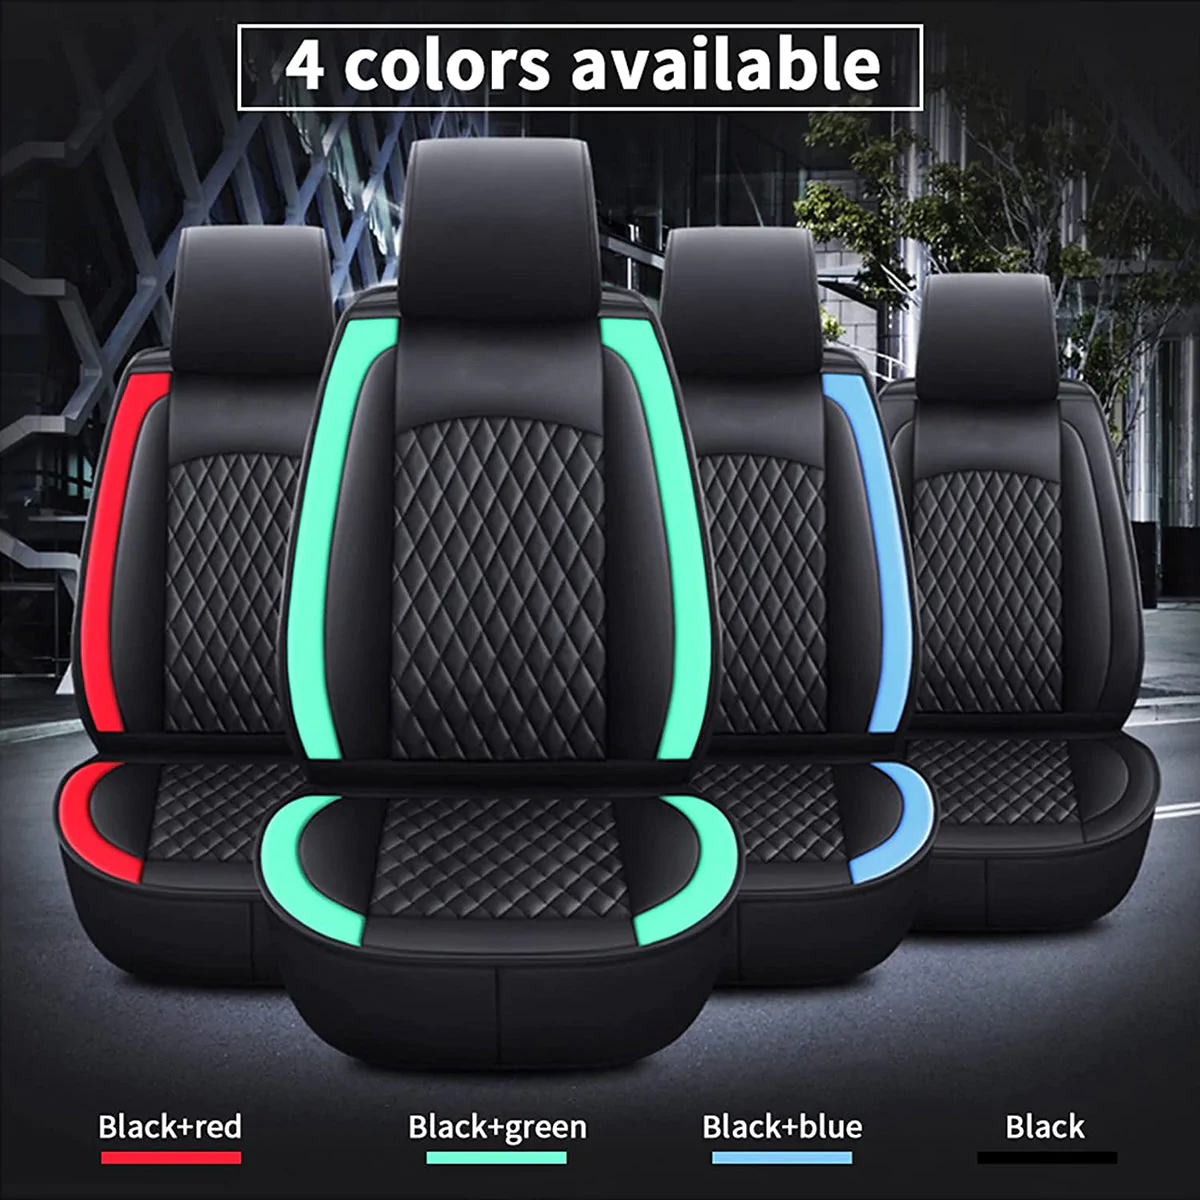 Custom Text For Seat Covers 5 Seats Full Set, Custom Fit For Your Cars, Leatherette Automotive Seat Cushion Protector Universal Fit, Vehicle Auto Interior Decor MG13988